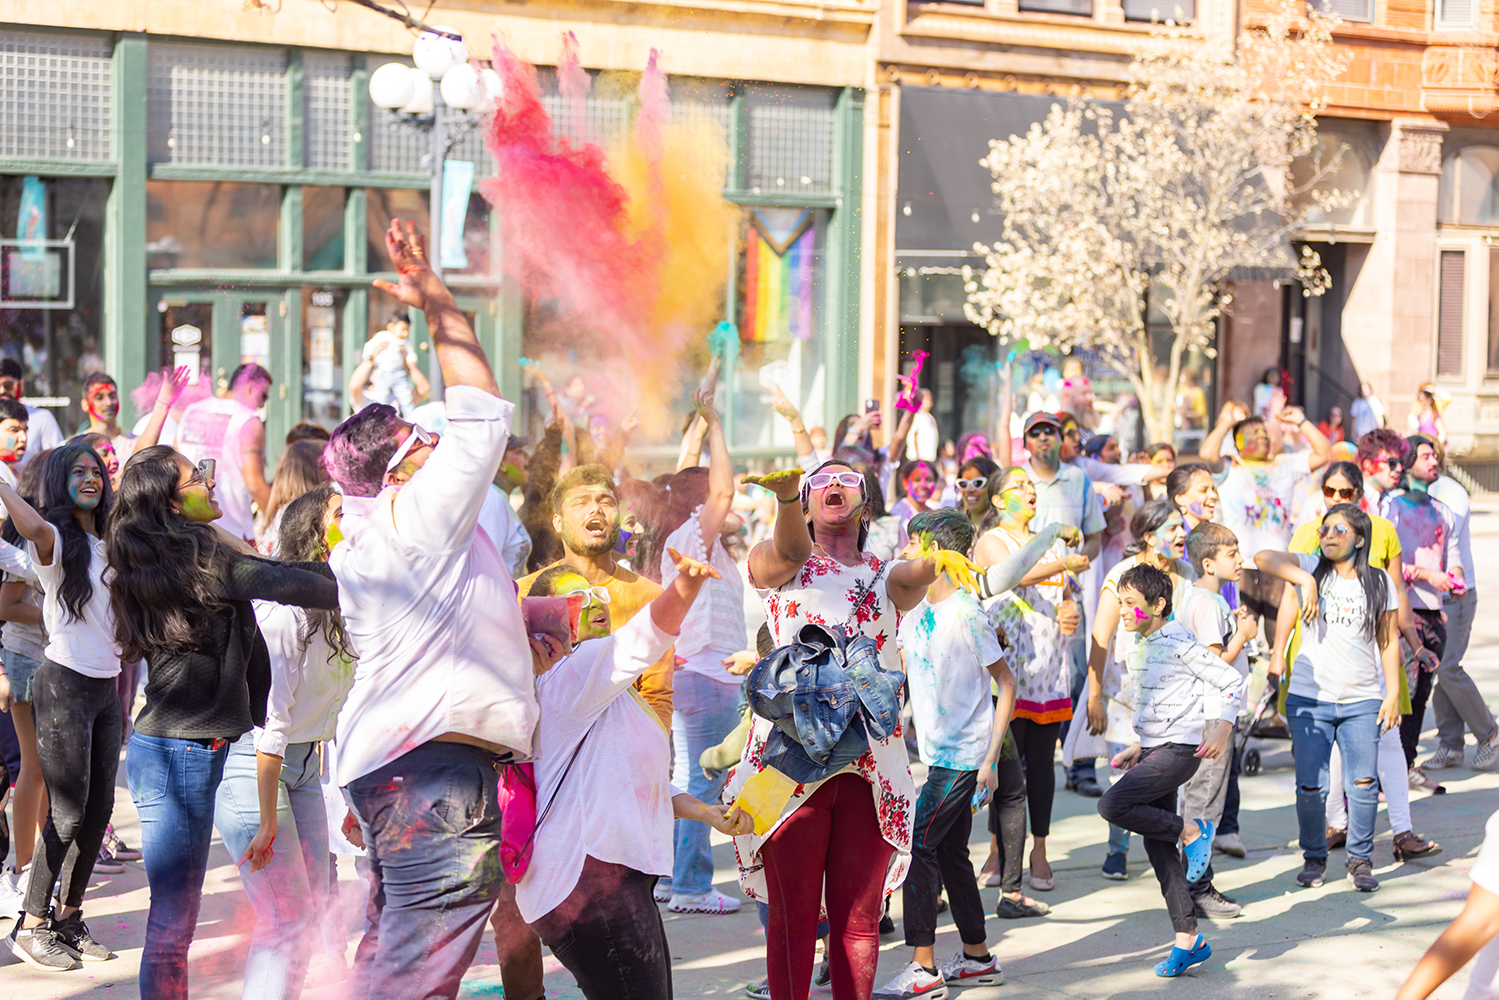 You can celebrate Holi in Uptown Normal on April 13th